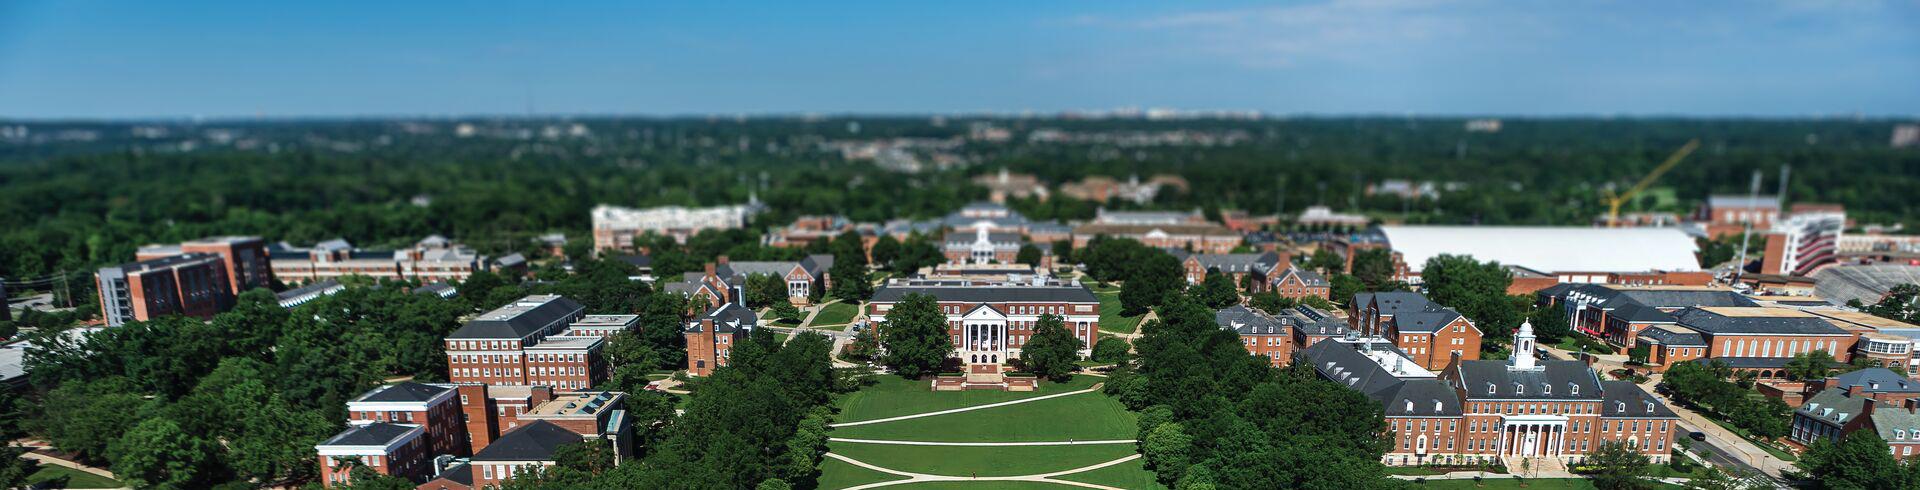 UMD Campus from above